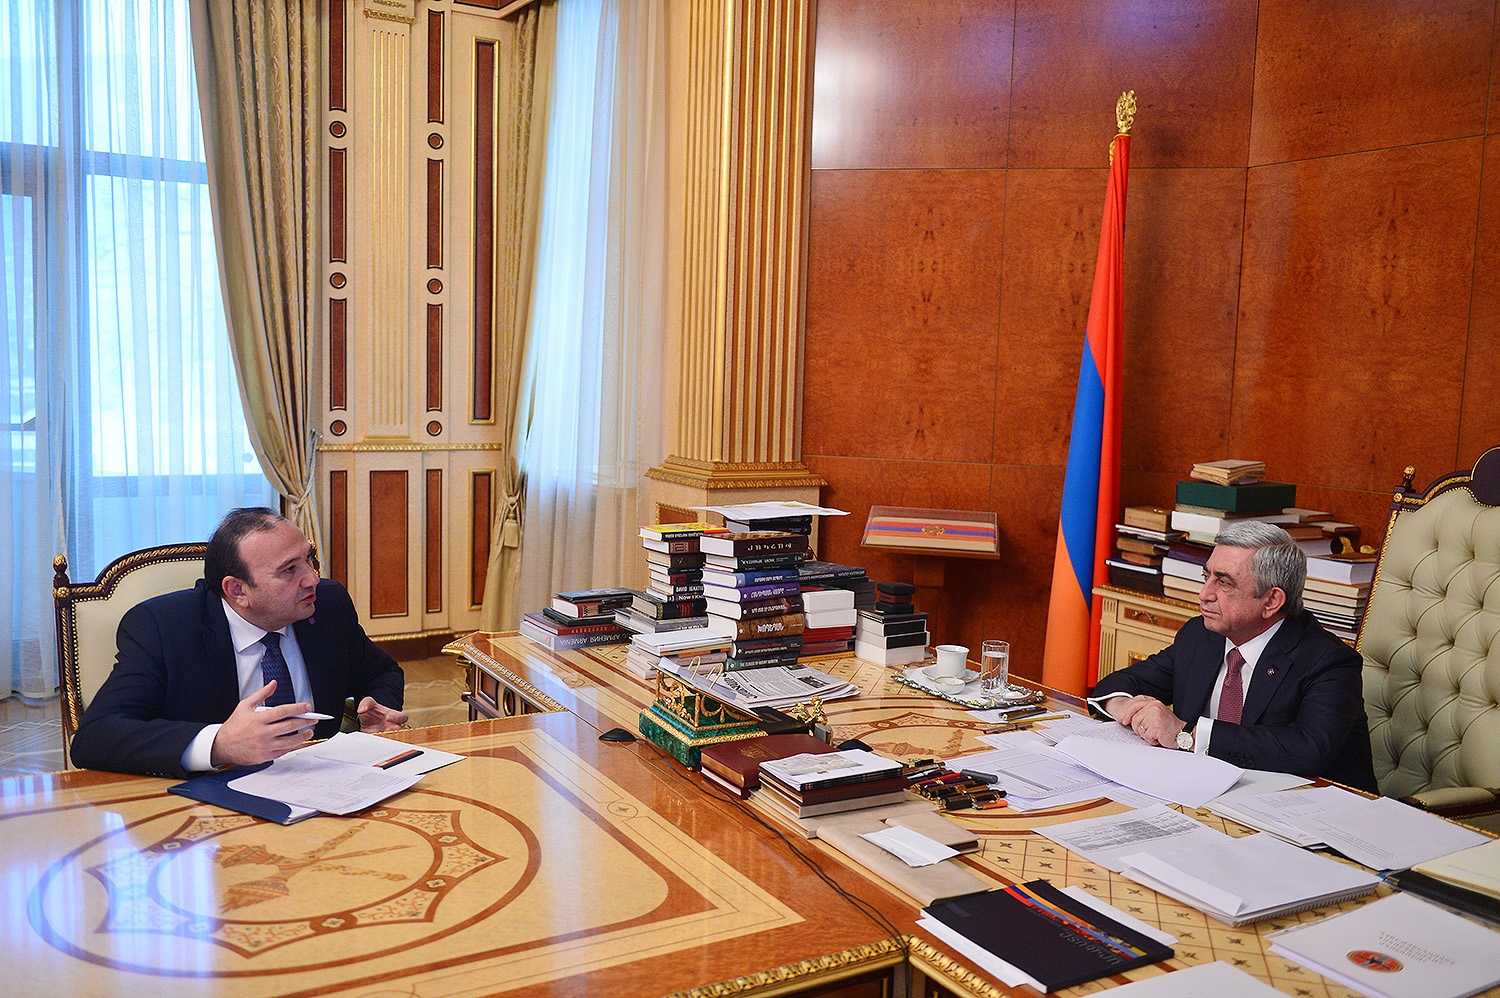 Levon Mkrtchyan reported to President Sargsyan on works and programs carried out